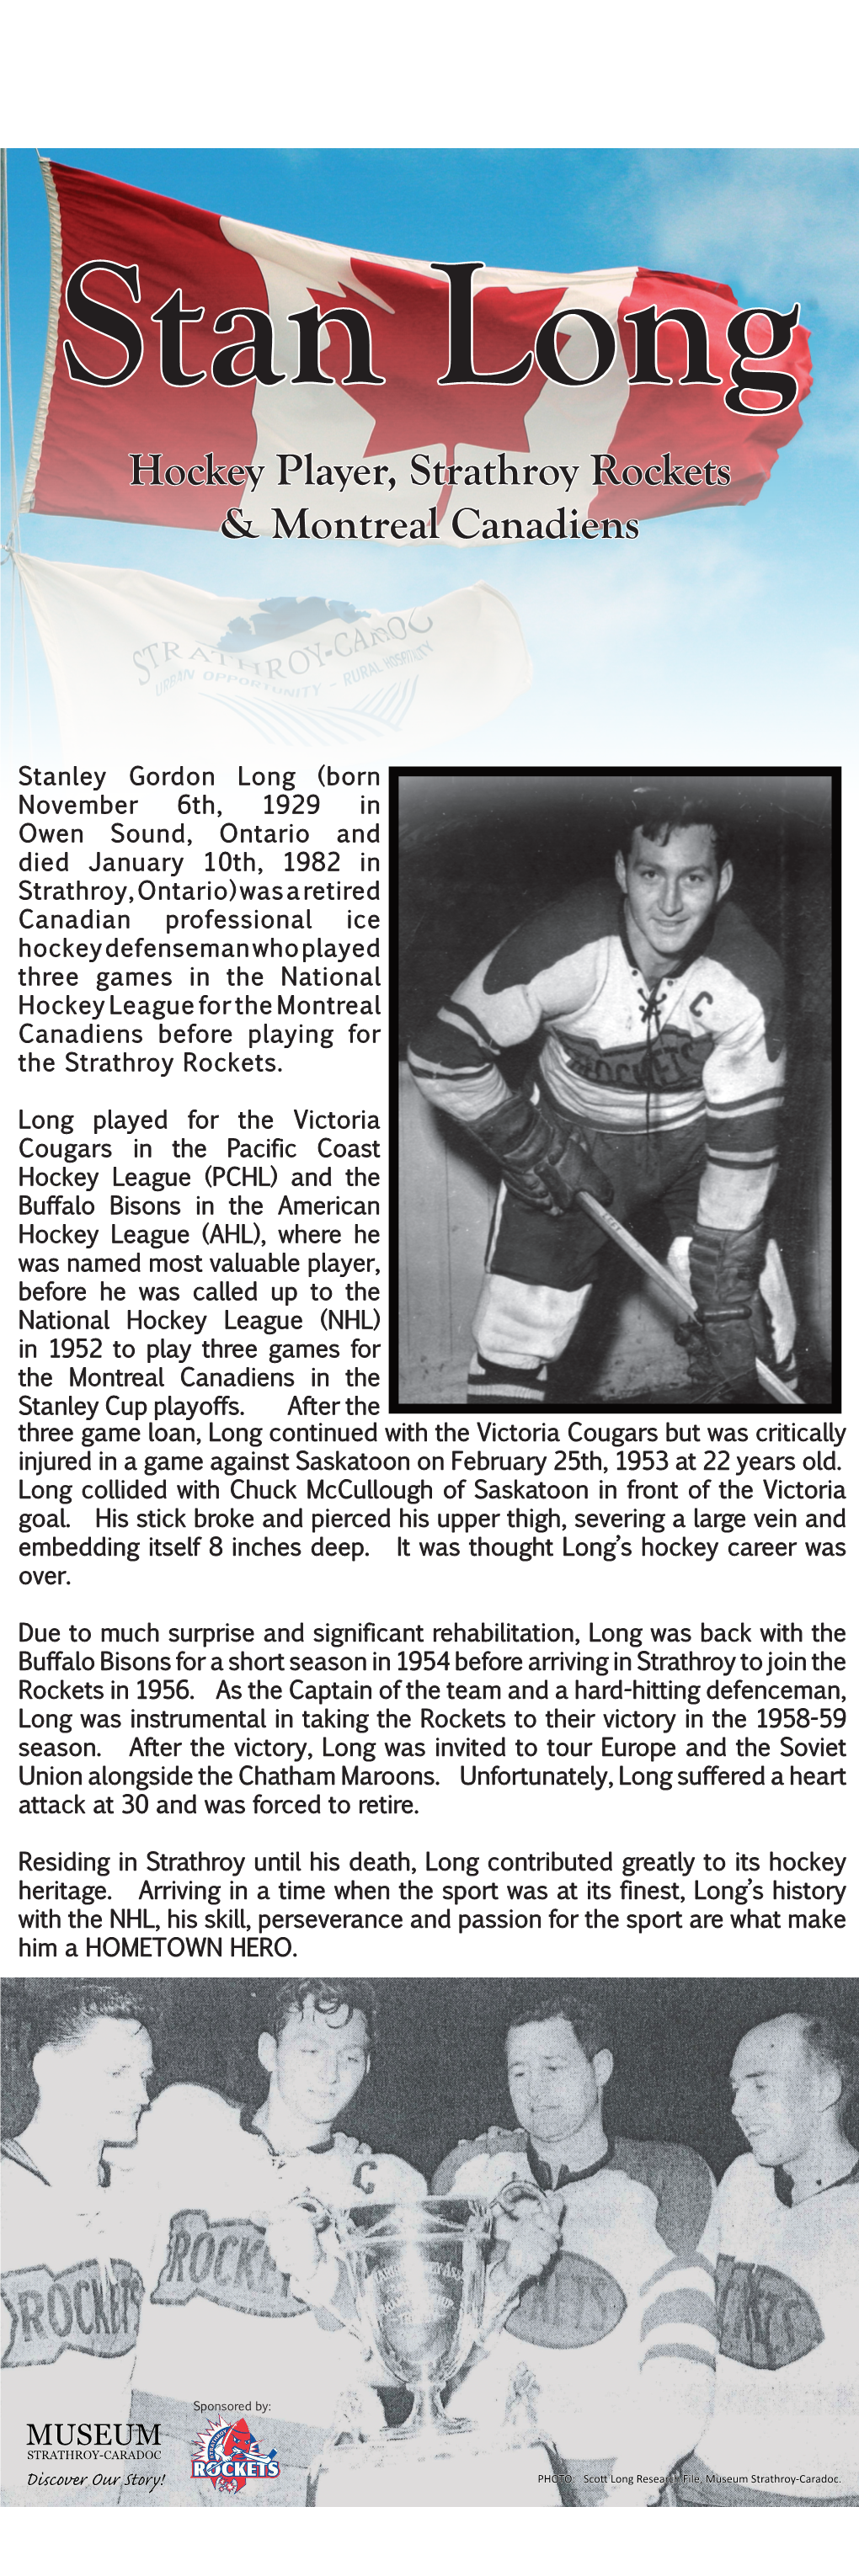 Stan Long Hockey Player, Strathroy Rockets & Montreal Canadiens